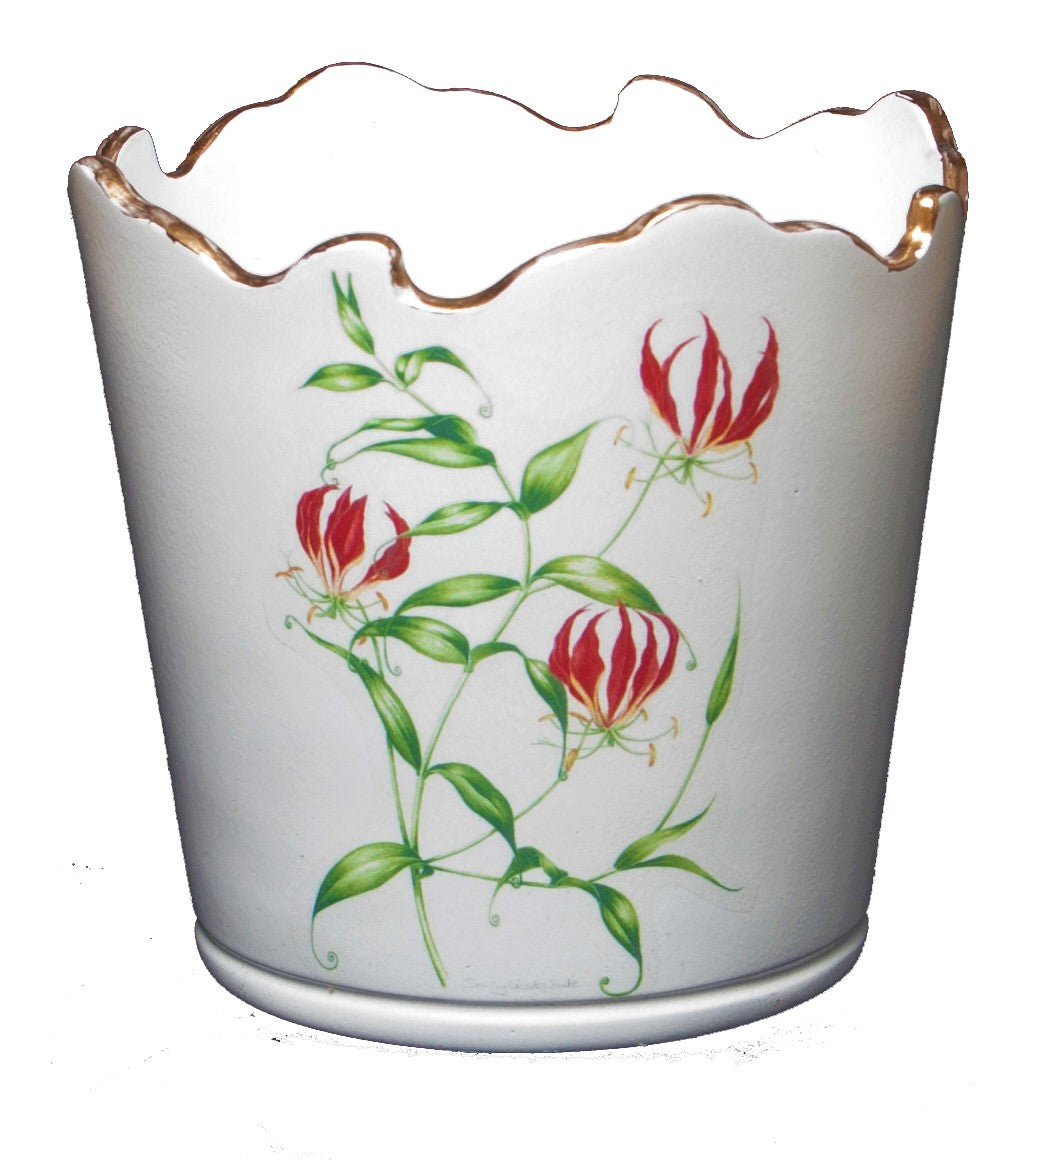 Scalloped Top Cachepot/Decorative Planter: Flame Lily